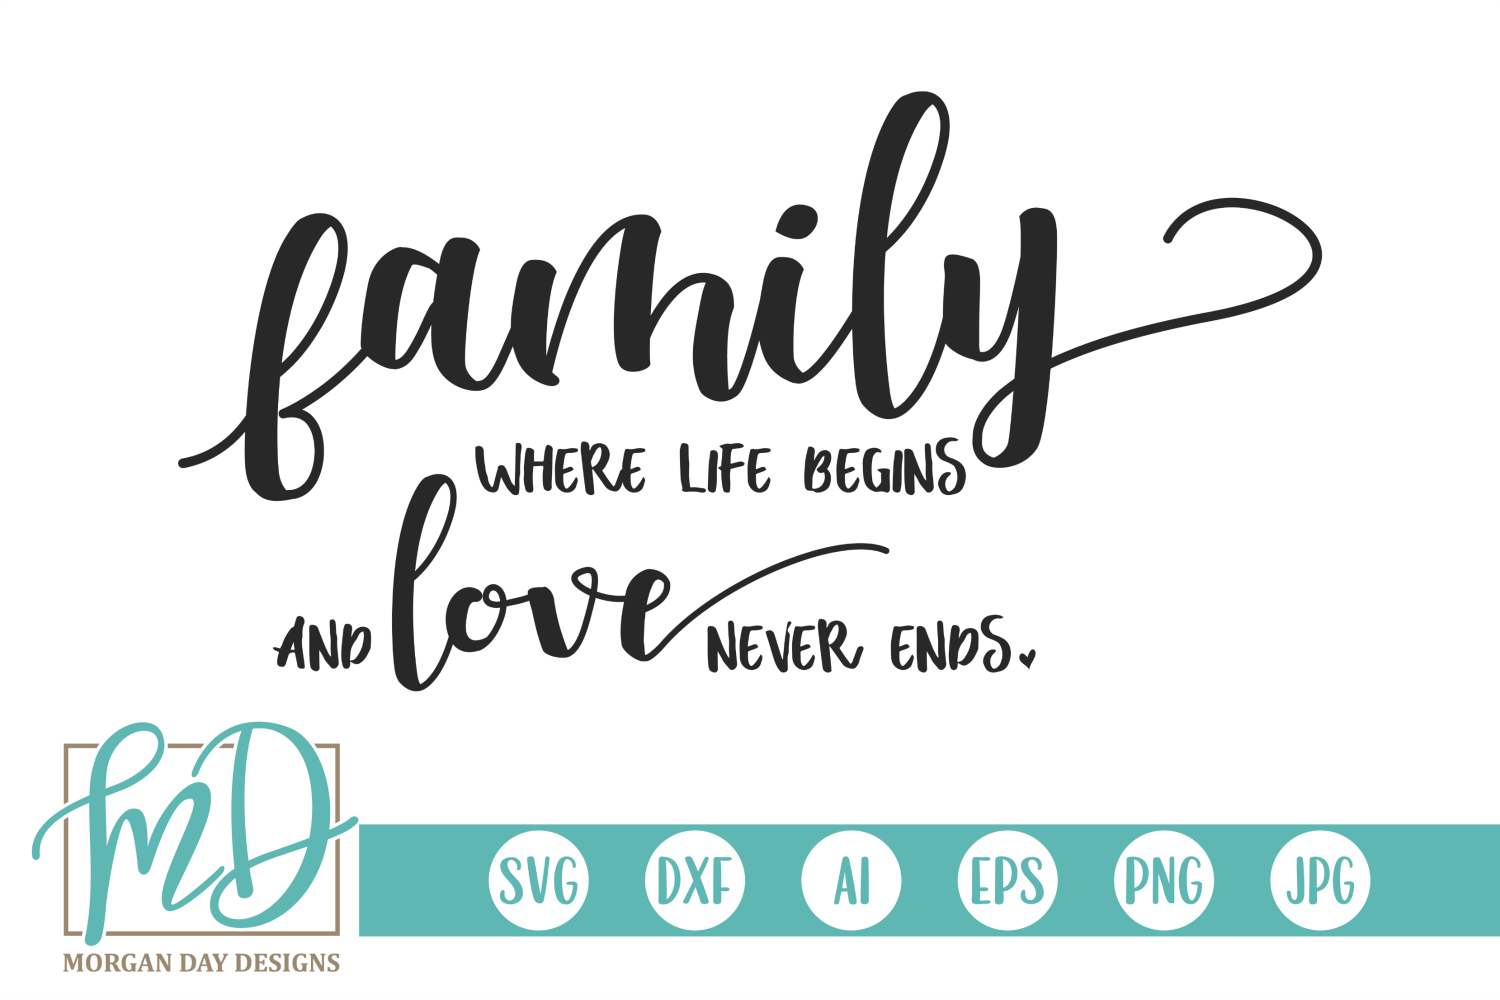 Family Where Life Begins And Love Never Ends SVG By Morgan Day Designs